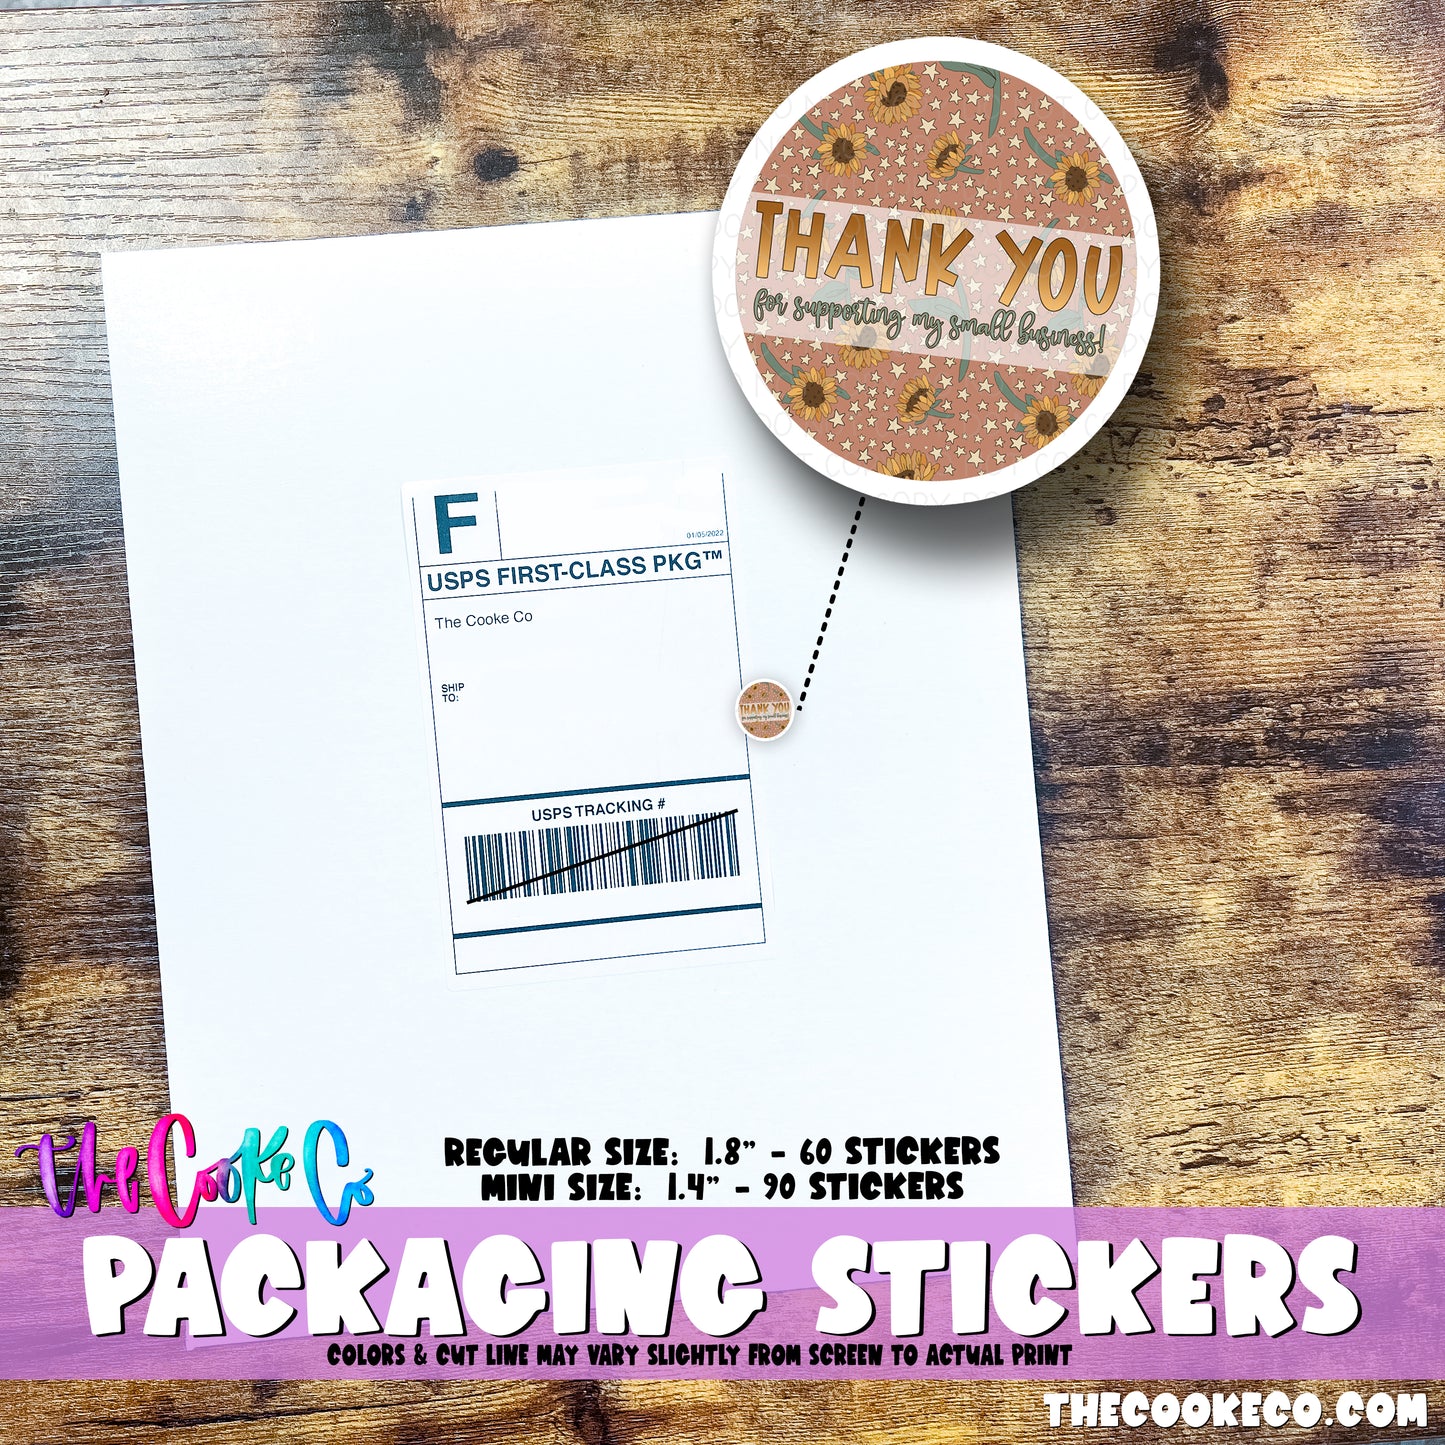 PTO Packaging Stickers | #C0818 - THANK YOU SUNFLOWERS